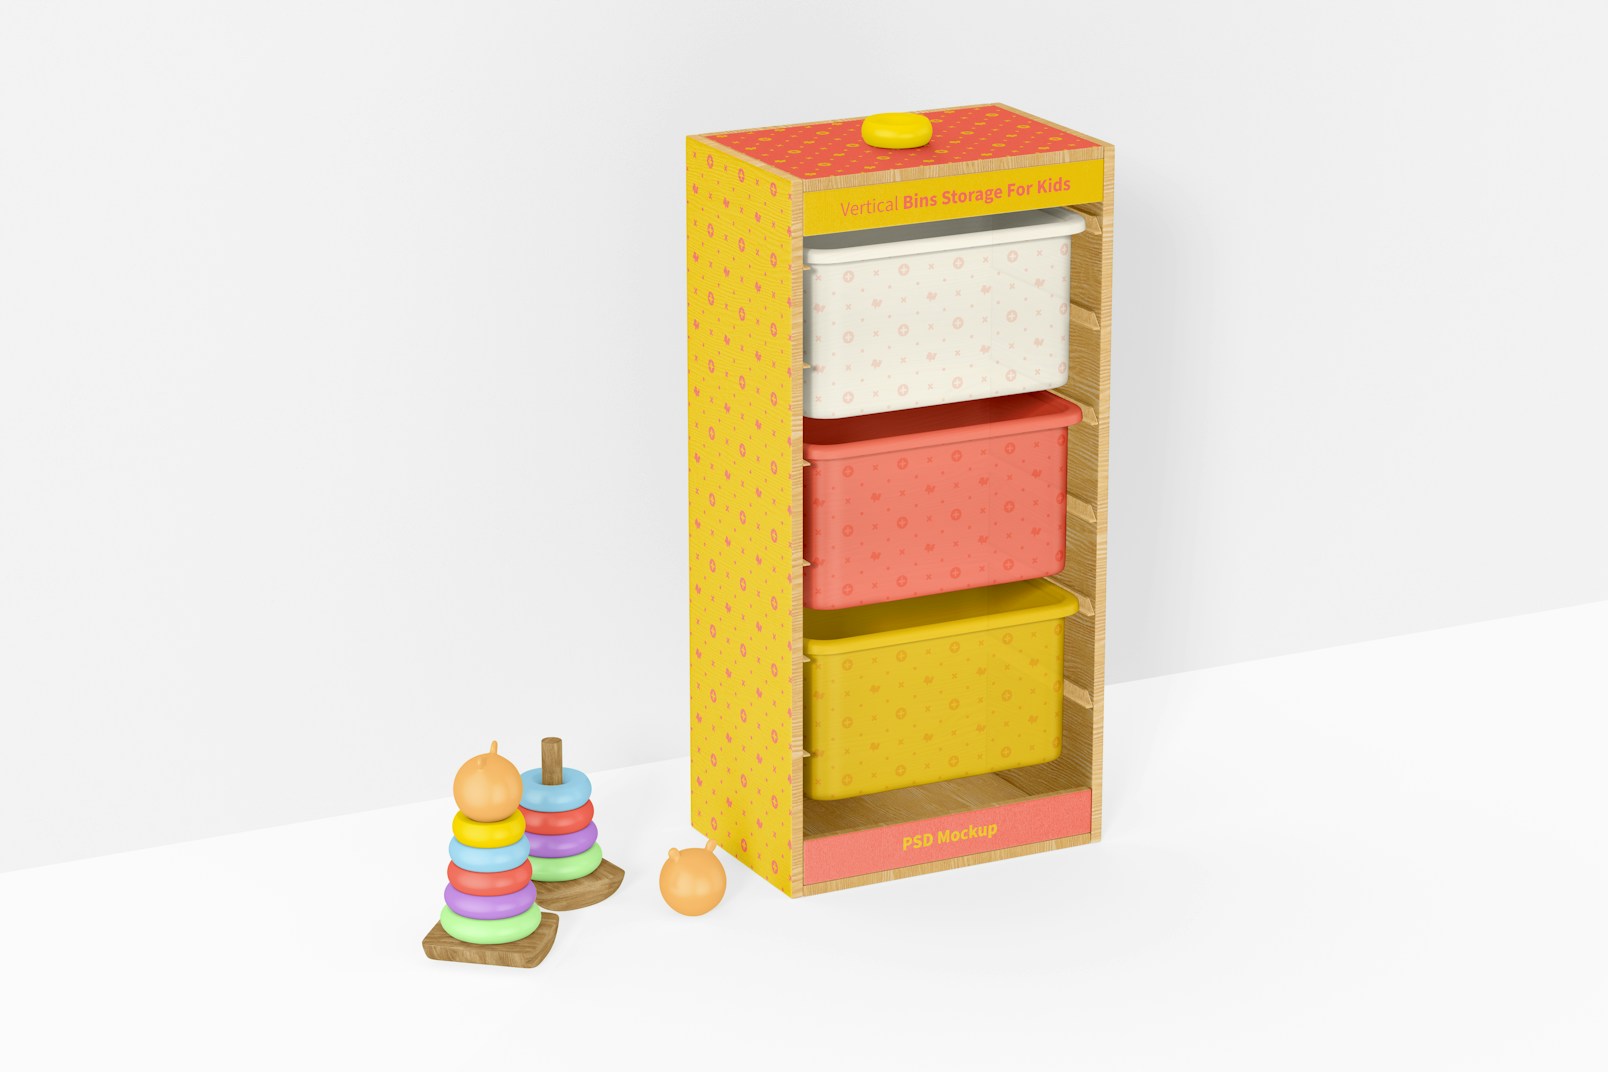 Vertical Bins Storage for Kids with Wall Mockup